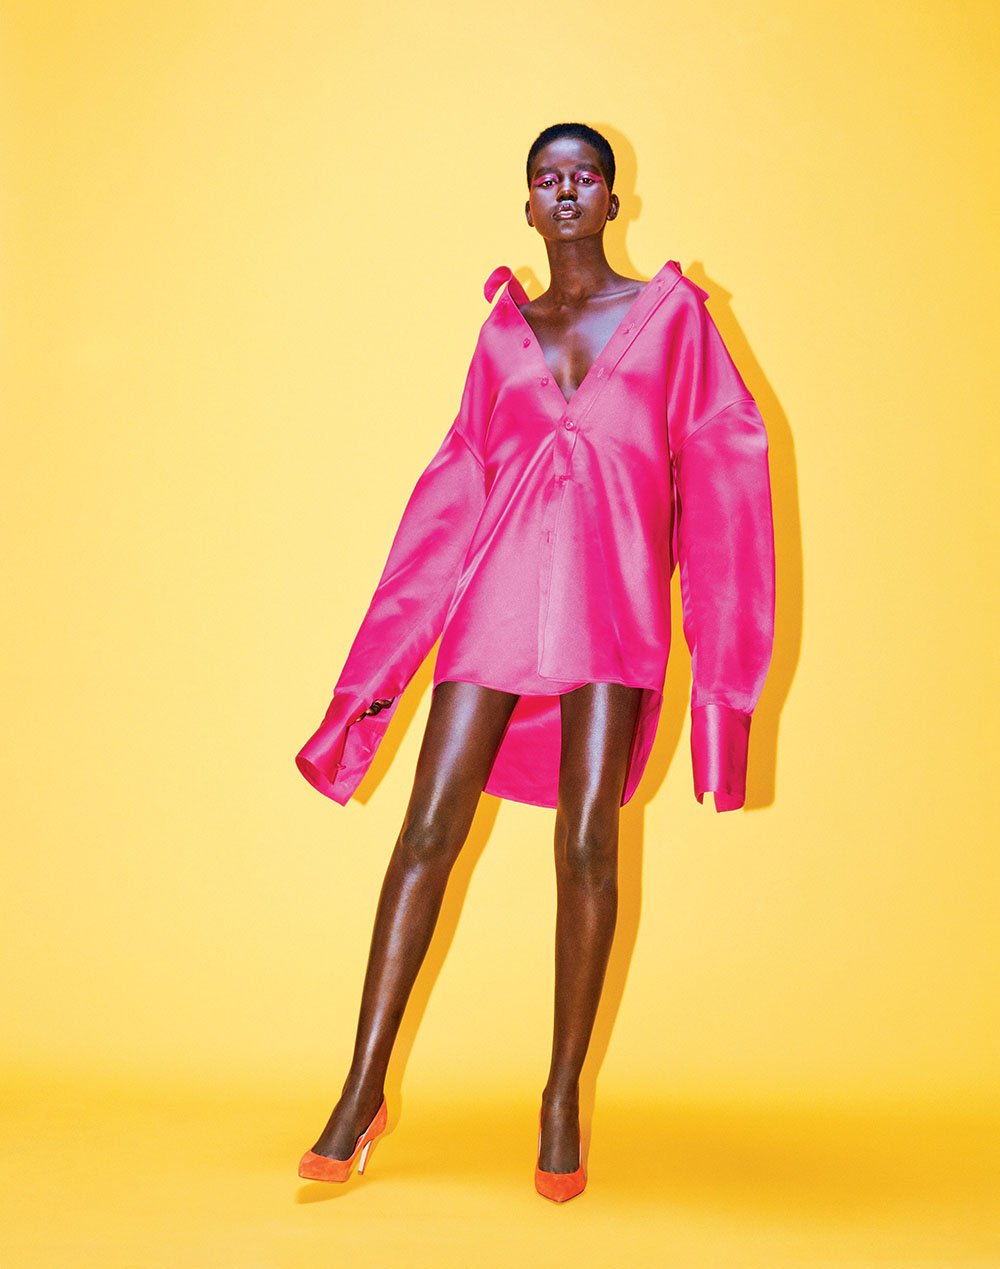 Adut Akech covers Allure US May 2019 by Daniel Jackson